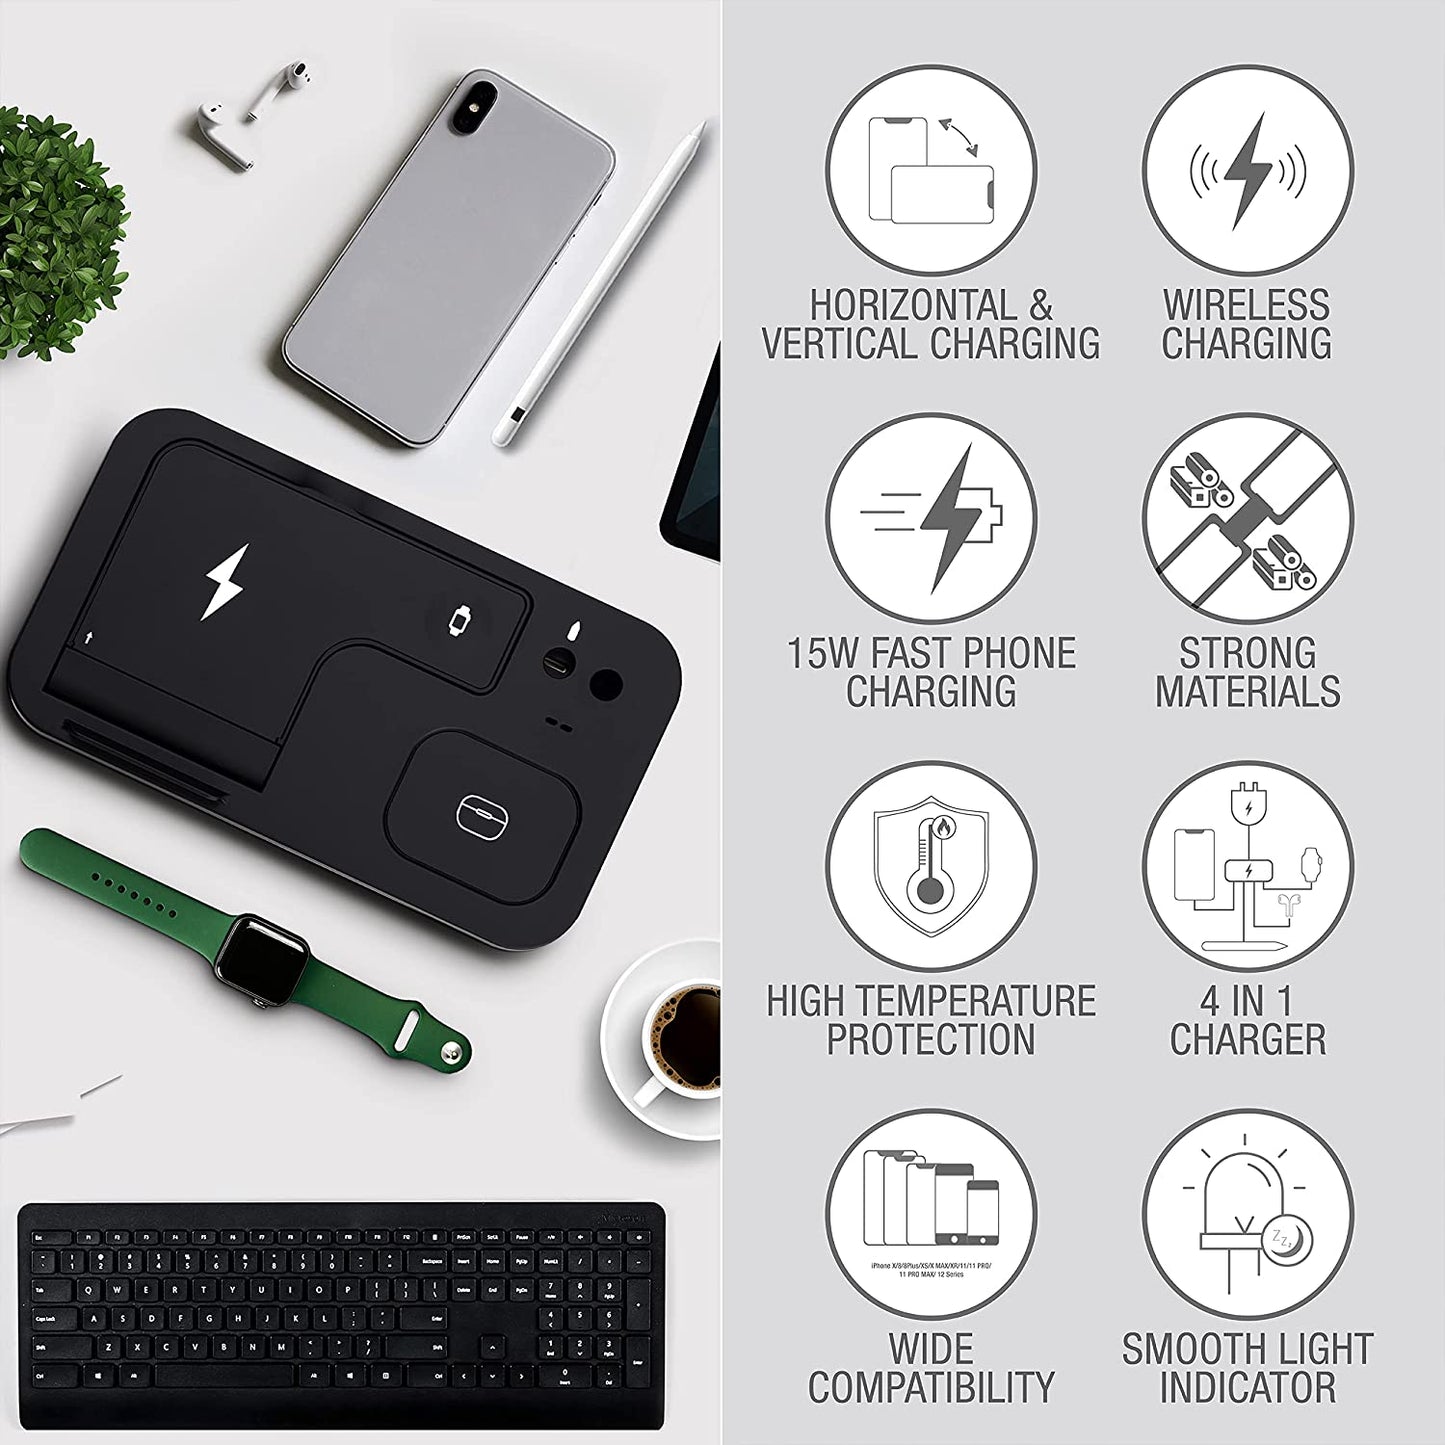 15W 4-in-1 Wireless Charging Station for Phone, Watch, AirPods, and Apple Pencil